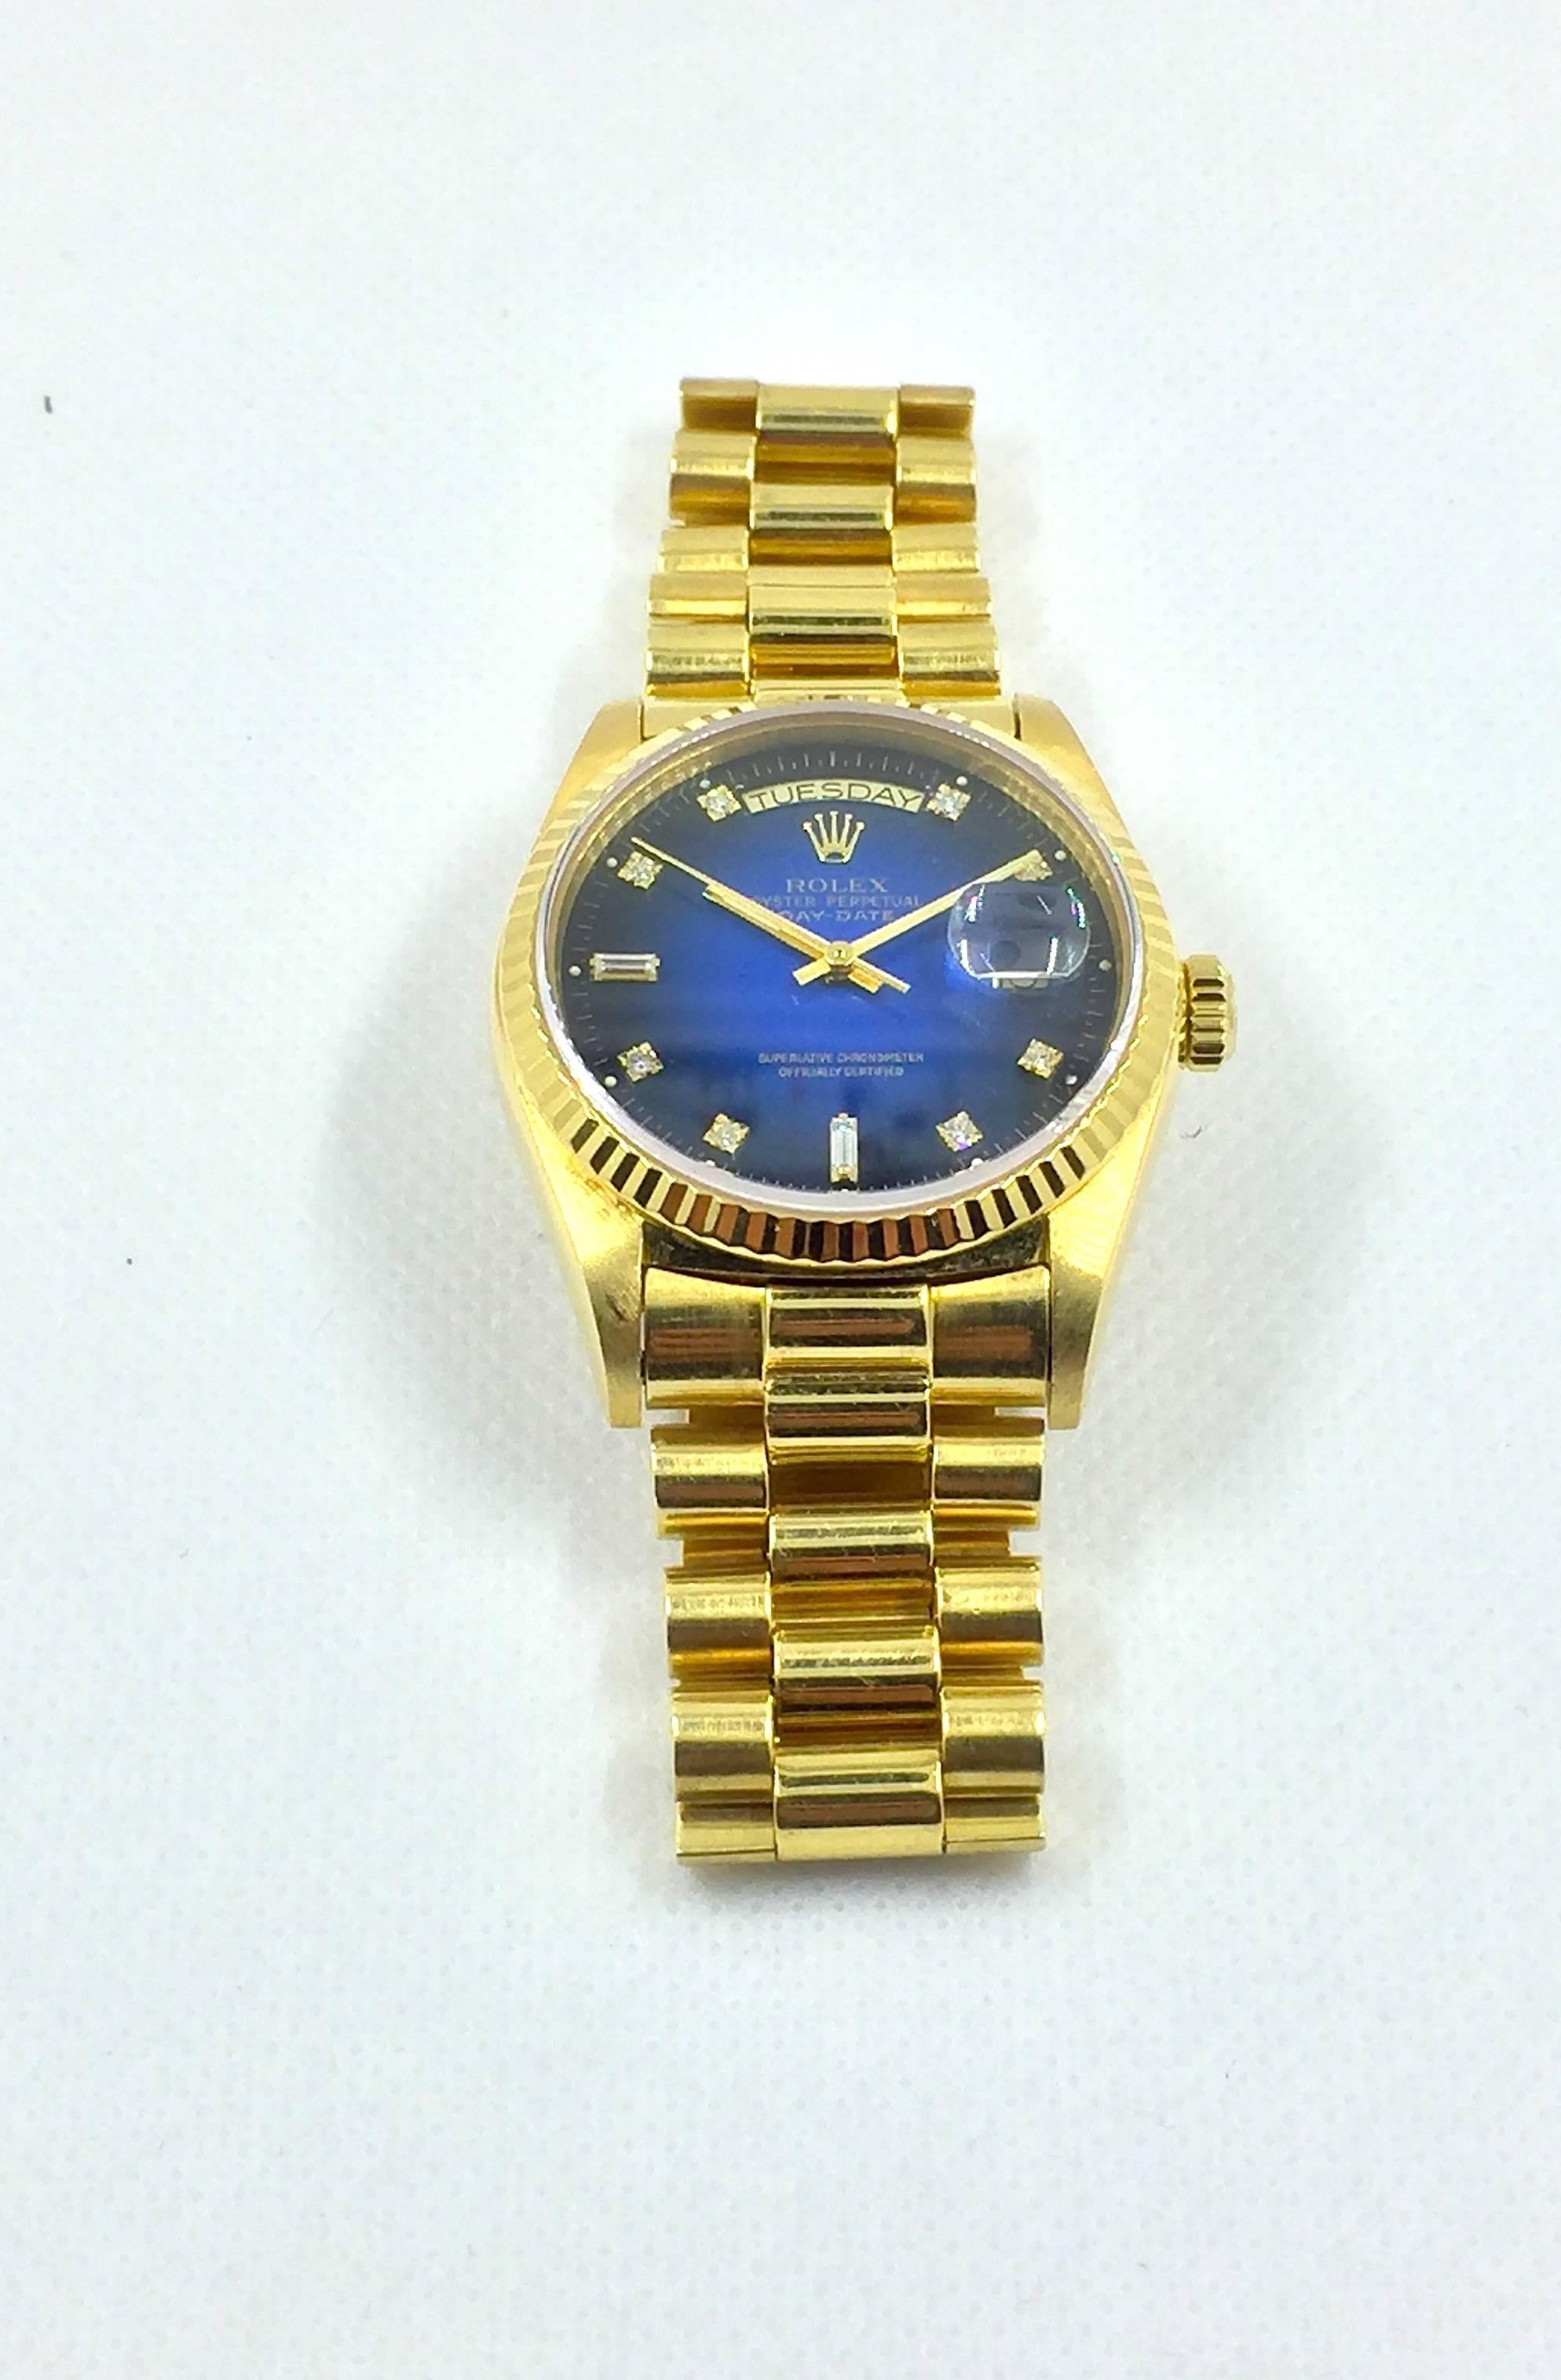 Vintage Rolex Oyster Perpetual Day-Date Presidential Watch
18K Yellow Gold Case and Bracelet
Rare Factory Blue Vignette Degrade Diamond Dial
Day and Date Functions
18K Yellow Gold Rolex Presidential Bracelet
Sapphire Crystal
Features Original